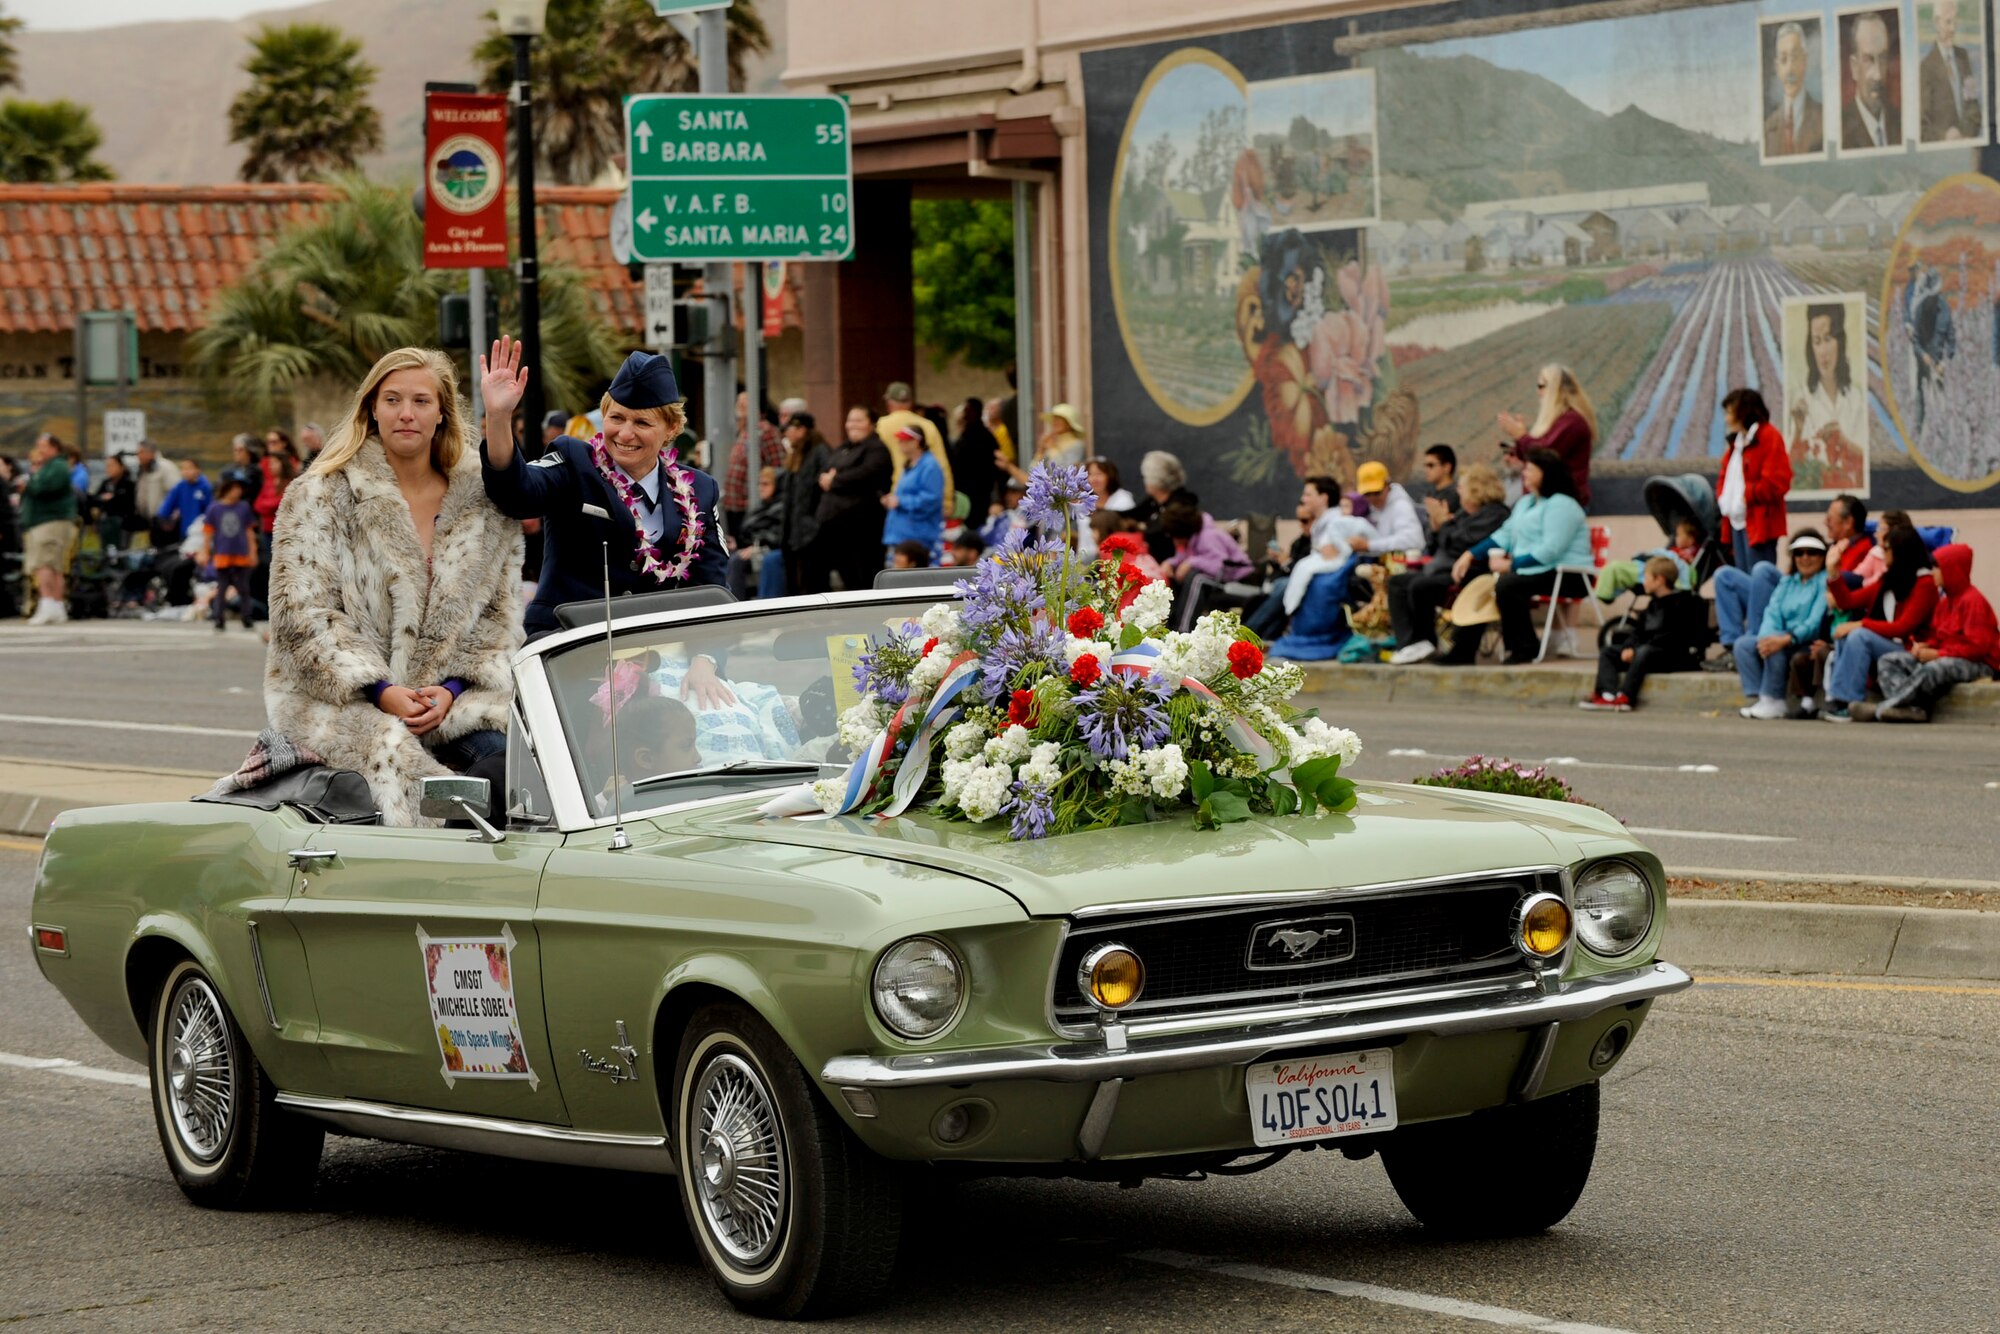 VANDENBERG AIR FORCE BASE, Calif. -- Chief Master Sgt. Michelle Sobel, 30th Medical Group command chief, waves to parade watchers during the city of Lompoc's 60th Annual Flower Festival Saturday, June 23, 2012. The parade is part of a five day celebration of Lompoc?s flower fields and culture. (U.S. Air Force photo/Staff Sgt. Levi Riendeau) 